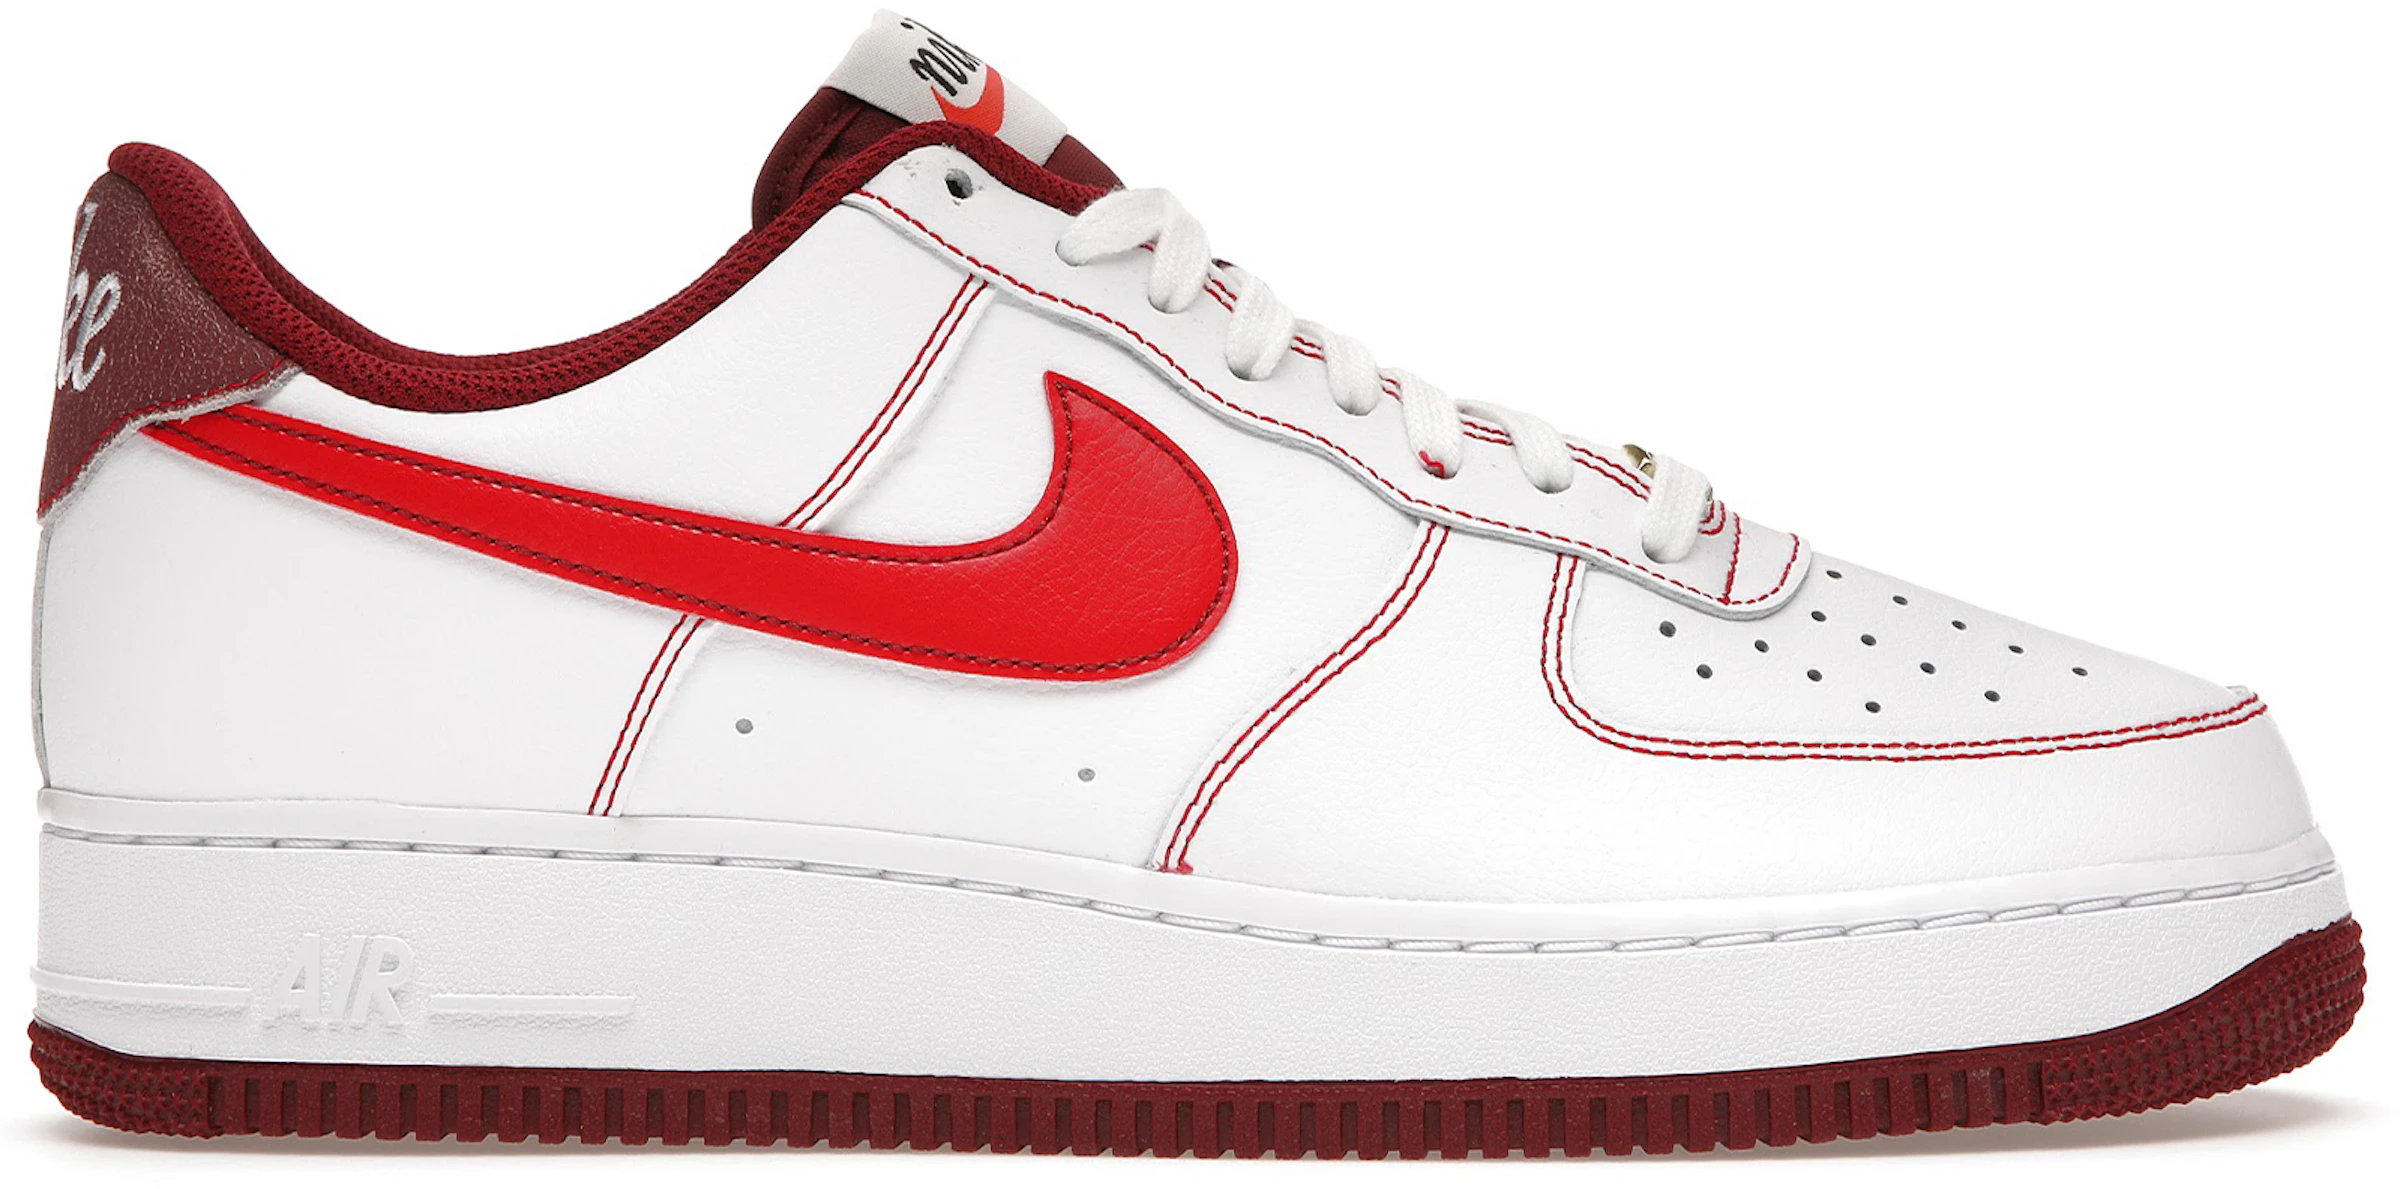 Identificar cuenca insulto Nike Air Force 1 Low '07 First Use White Team Red - DA8478-101 - ES